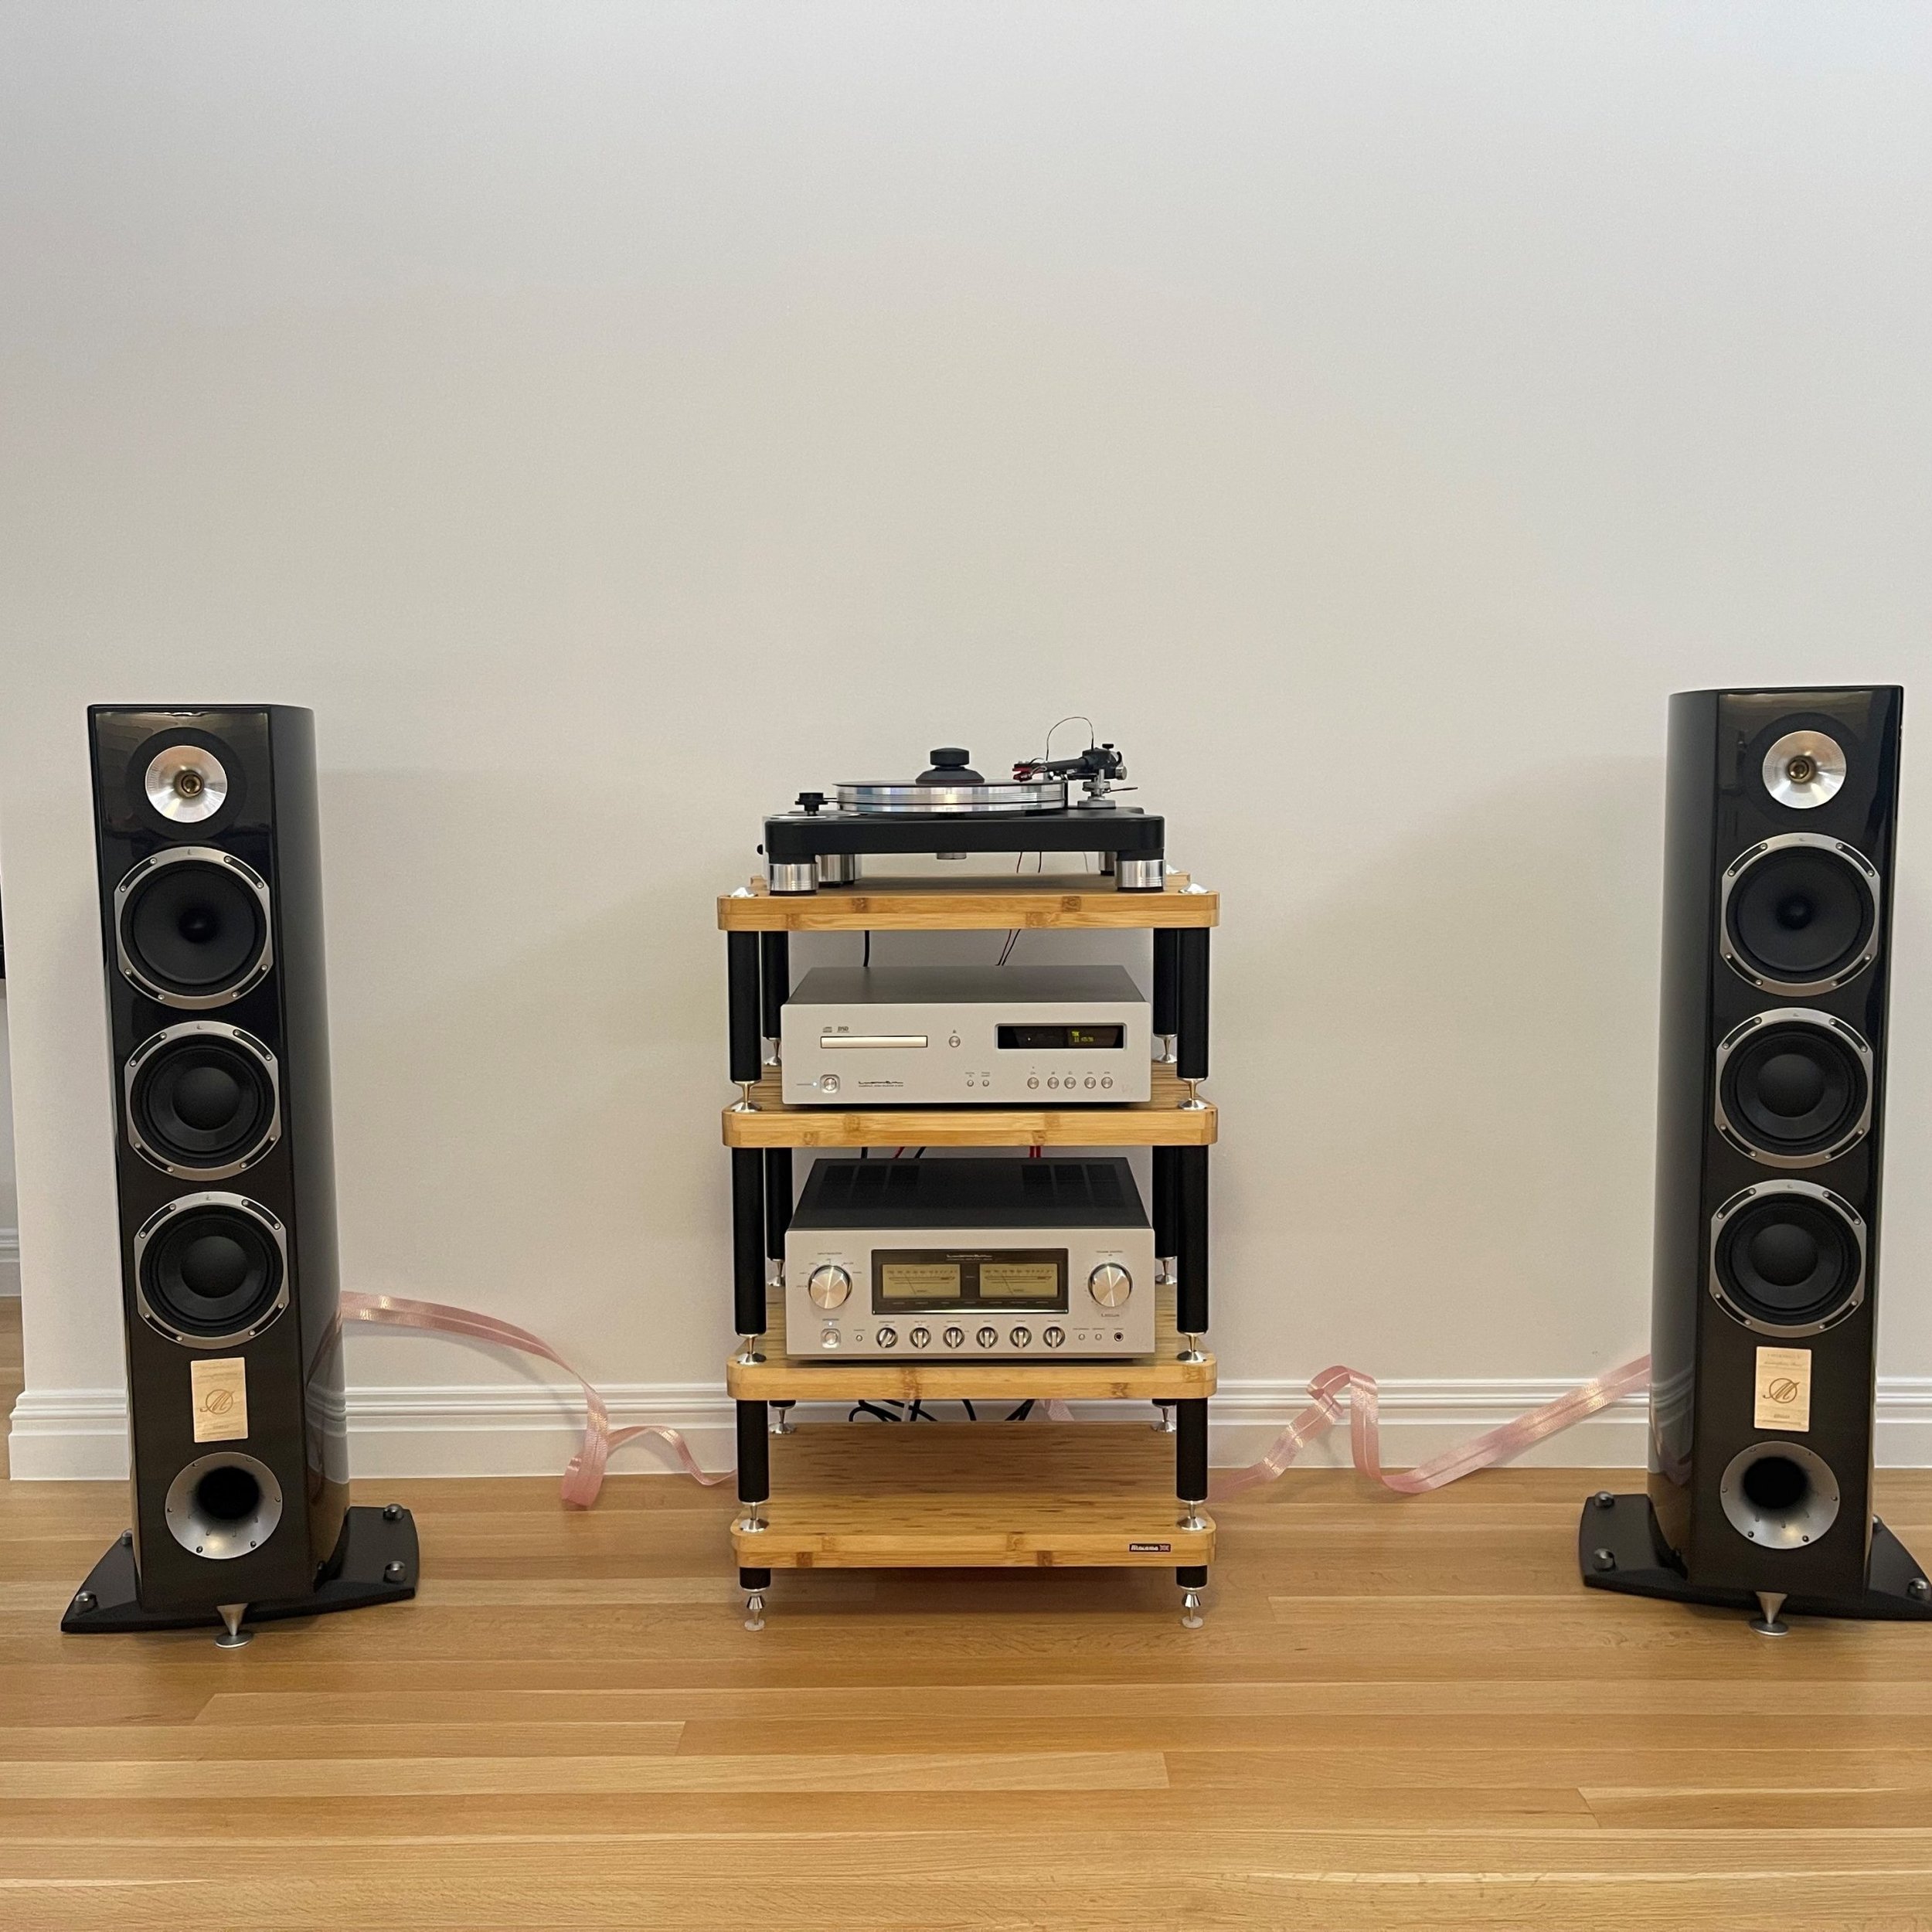 Triangle Magellan Cello 40th Anniversary Speakers, Luxman Electronics, VPI Turnable with Nordost Cables